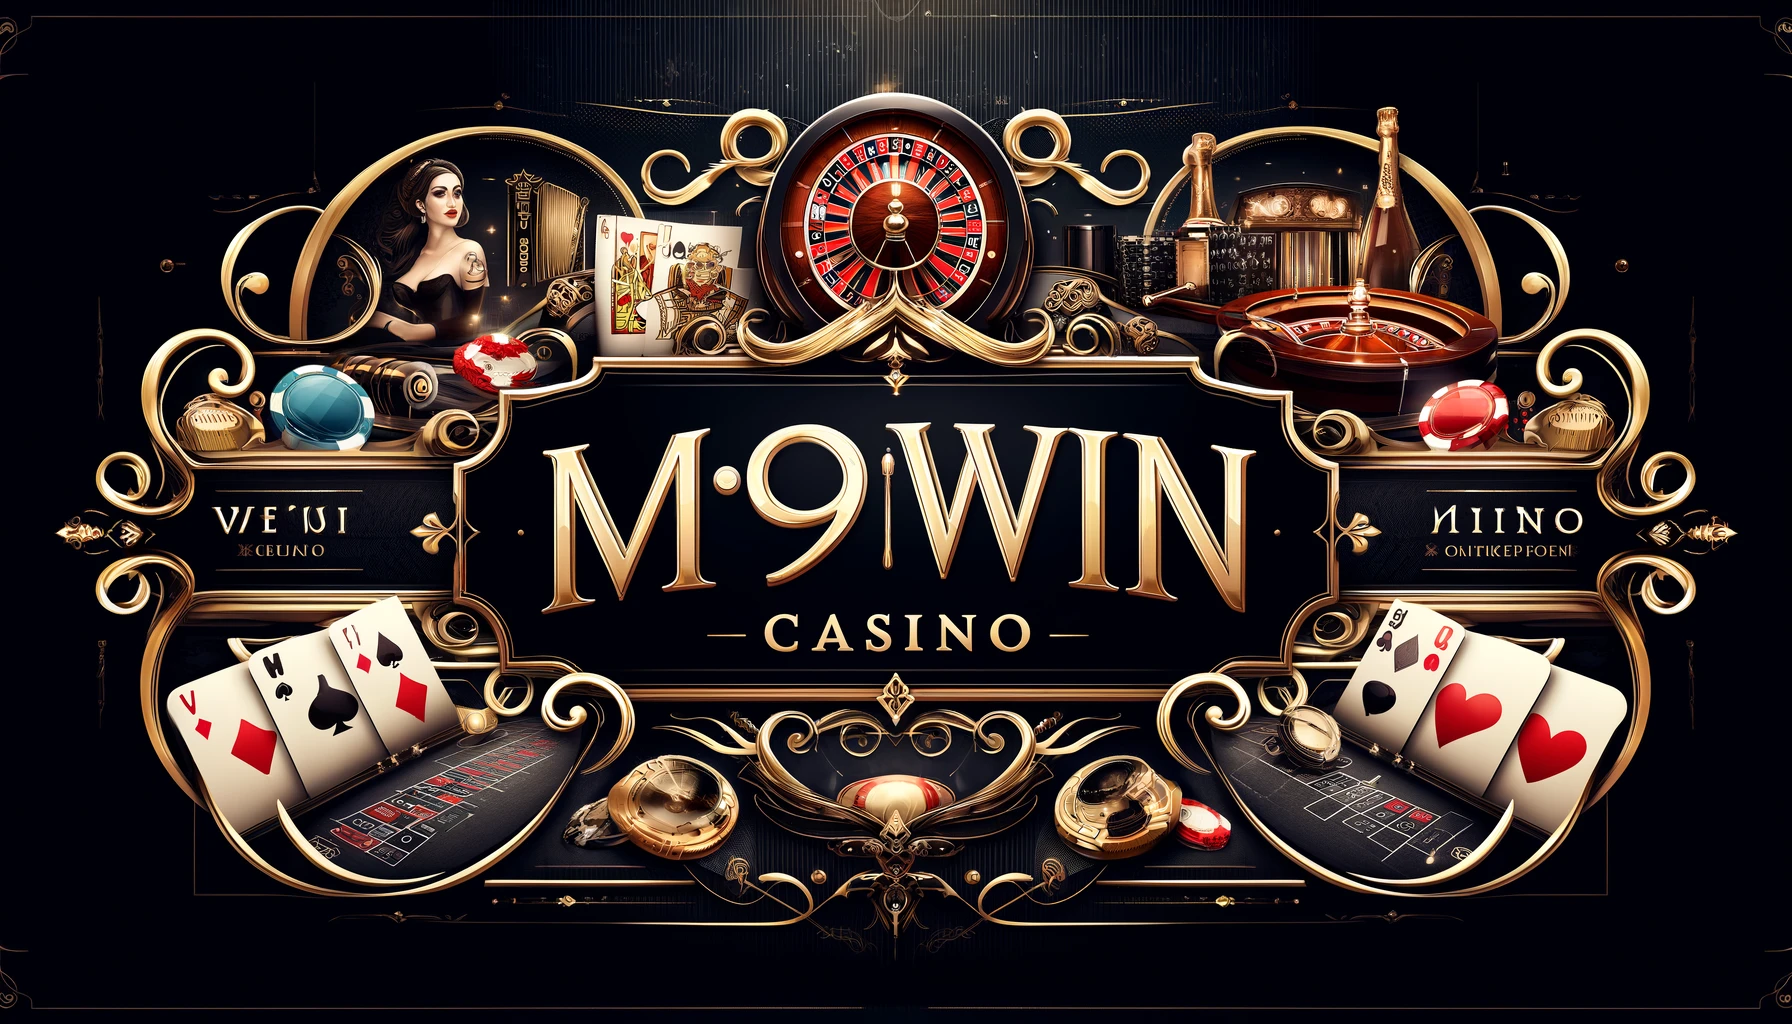 Exploring the Welcome Bonus for New Players at M99win Casino